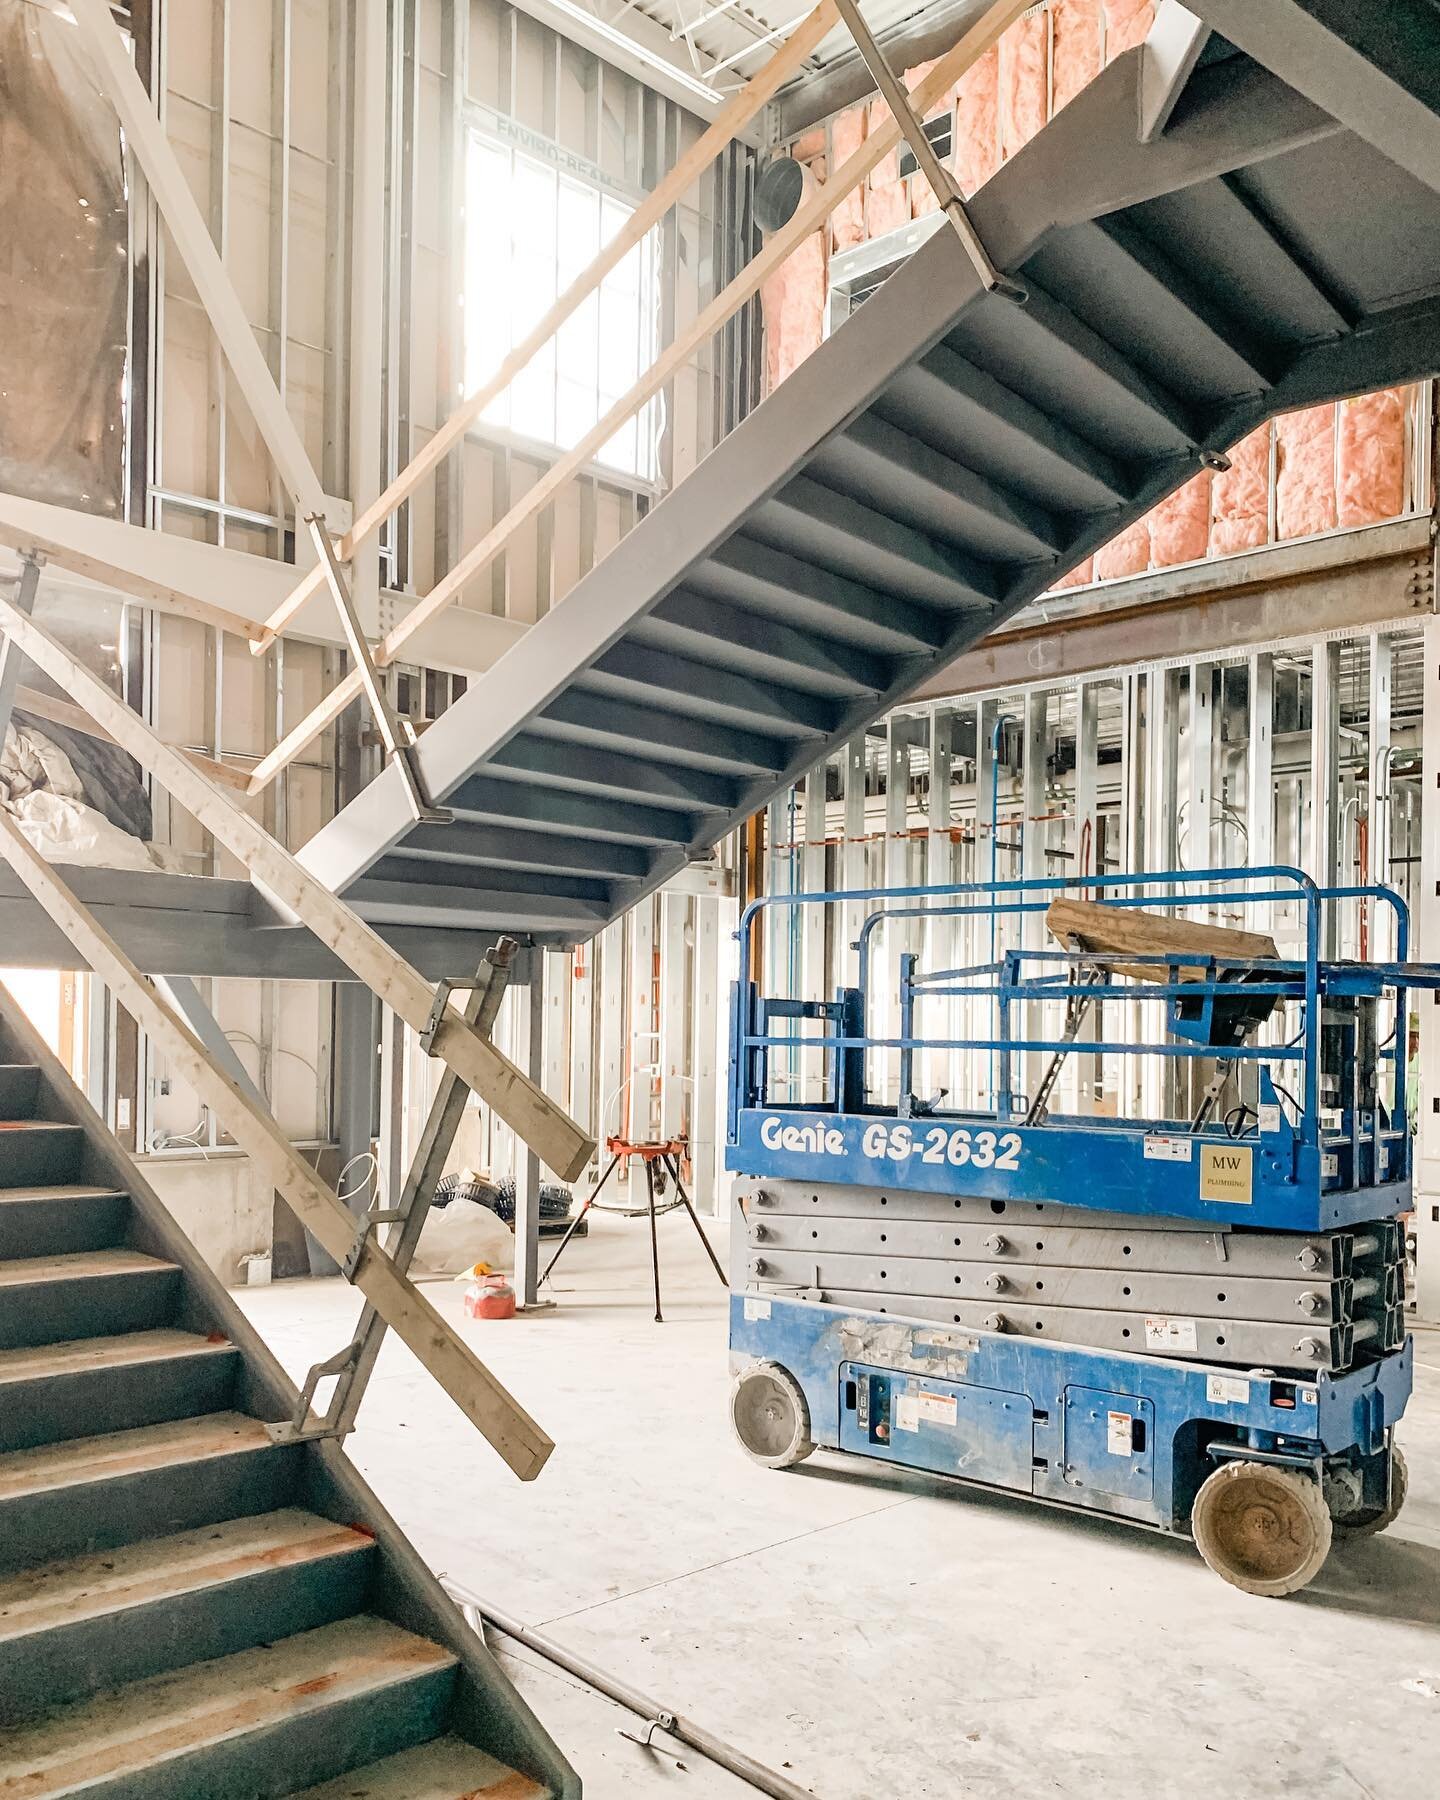 Lots of progress being made at Longfellow Elementary in Great Falls. This main staircase is one of our favorite moments in the school. @sletten_construction